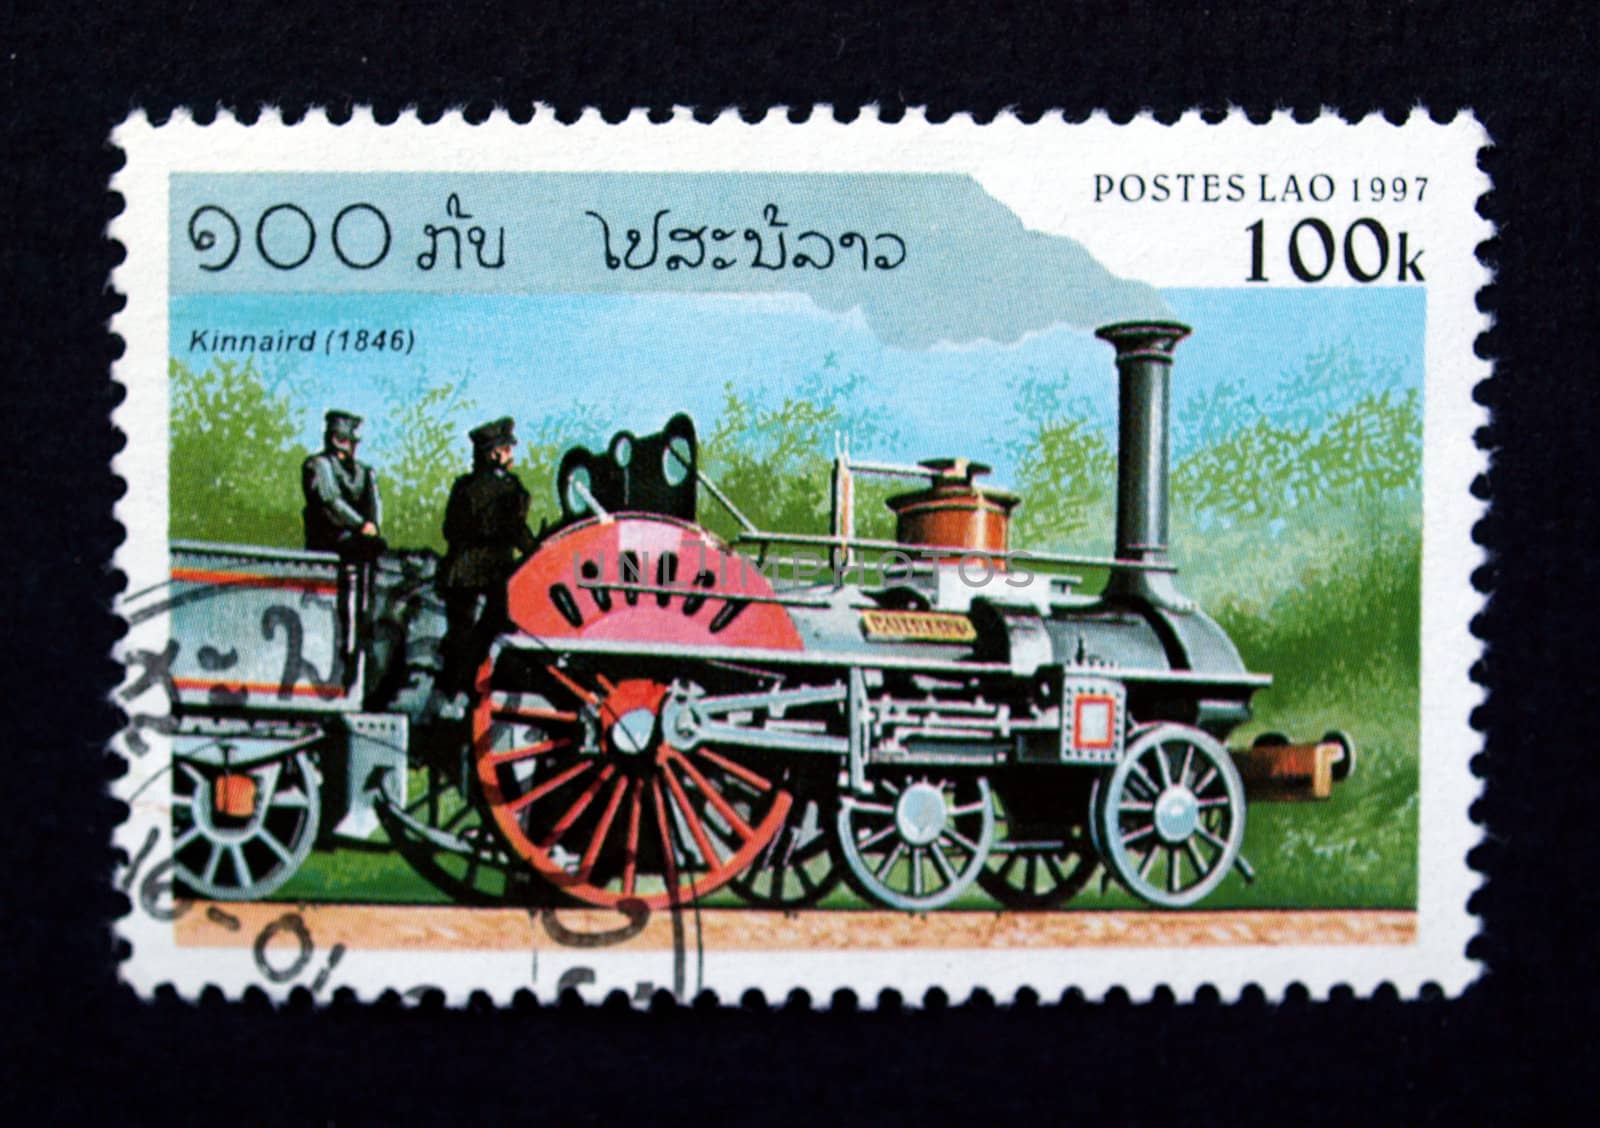 Lao stamp with train by paolo77